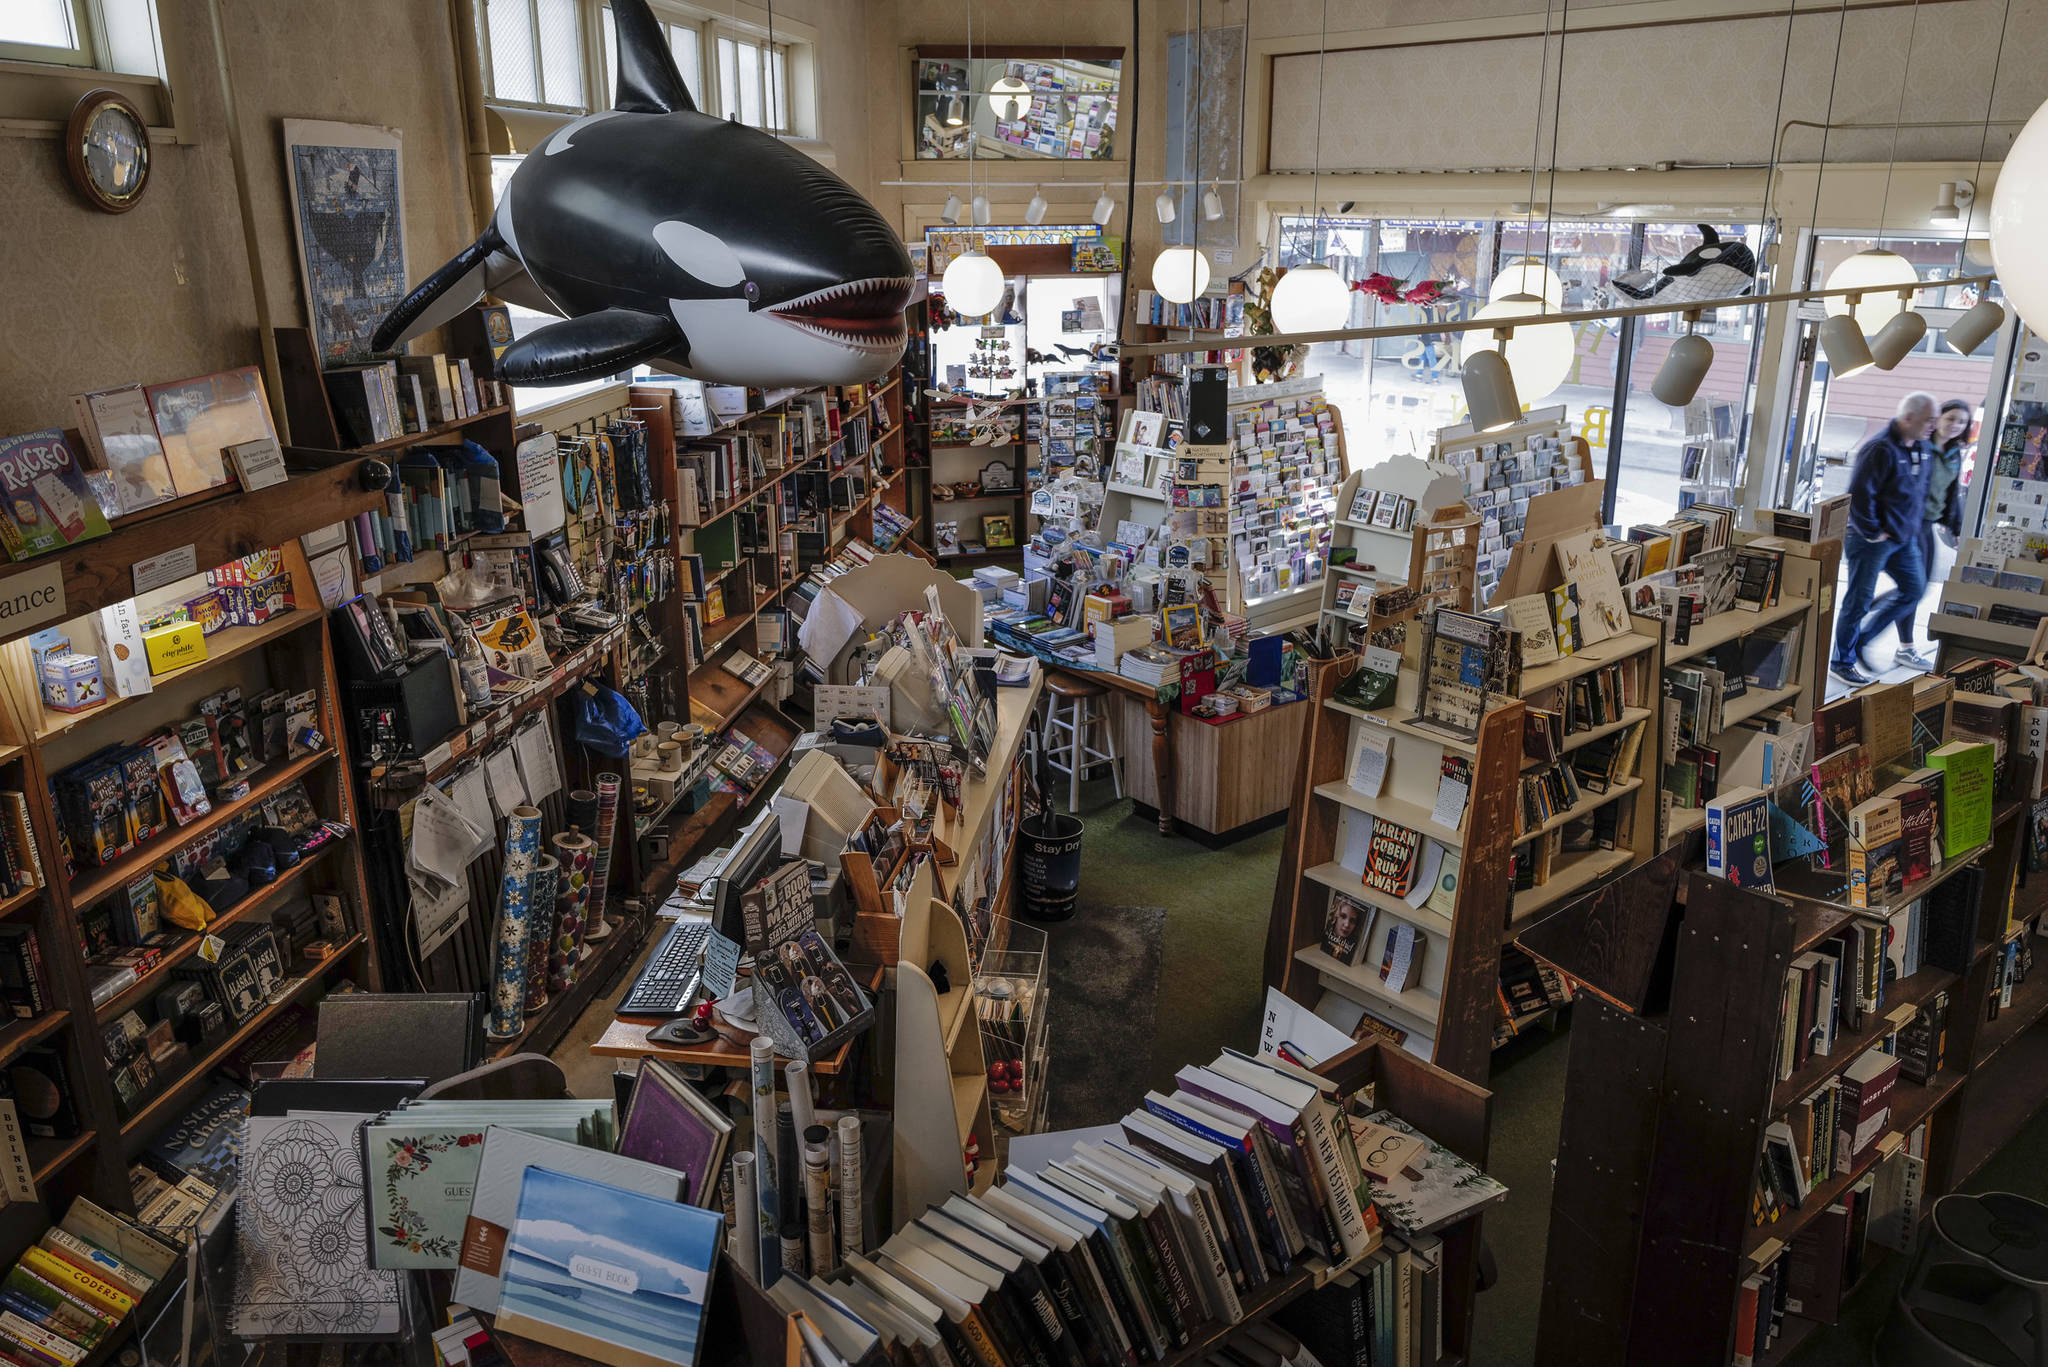 Hearthside Books is moving out of its longtime home in the Triangle Building at the corner of Franklin and Front Streets and moving to a new location in the Wharf. (Michael Penn | Juneau Empire)